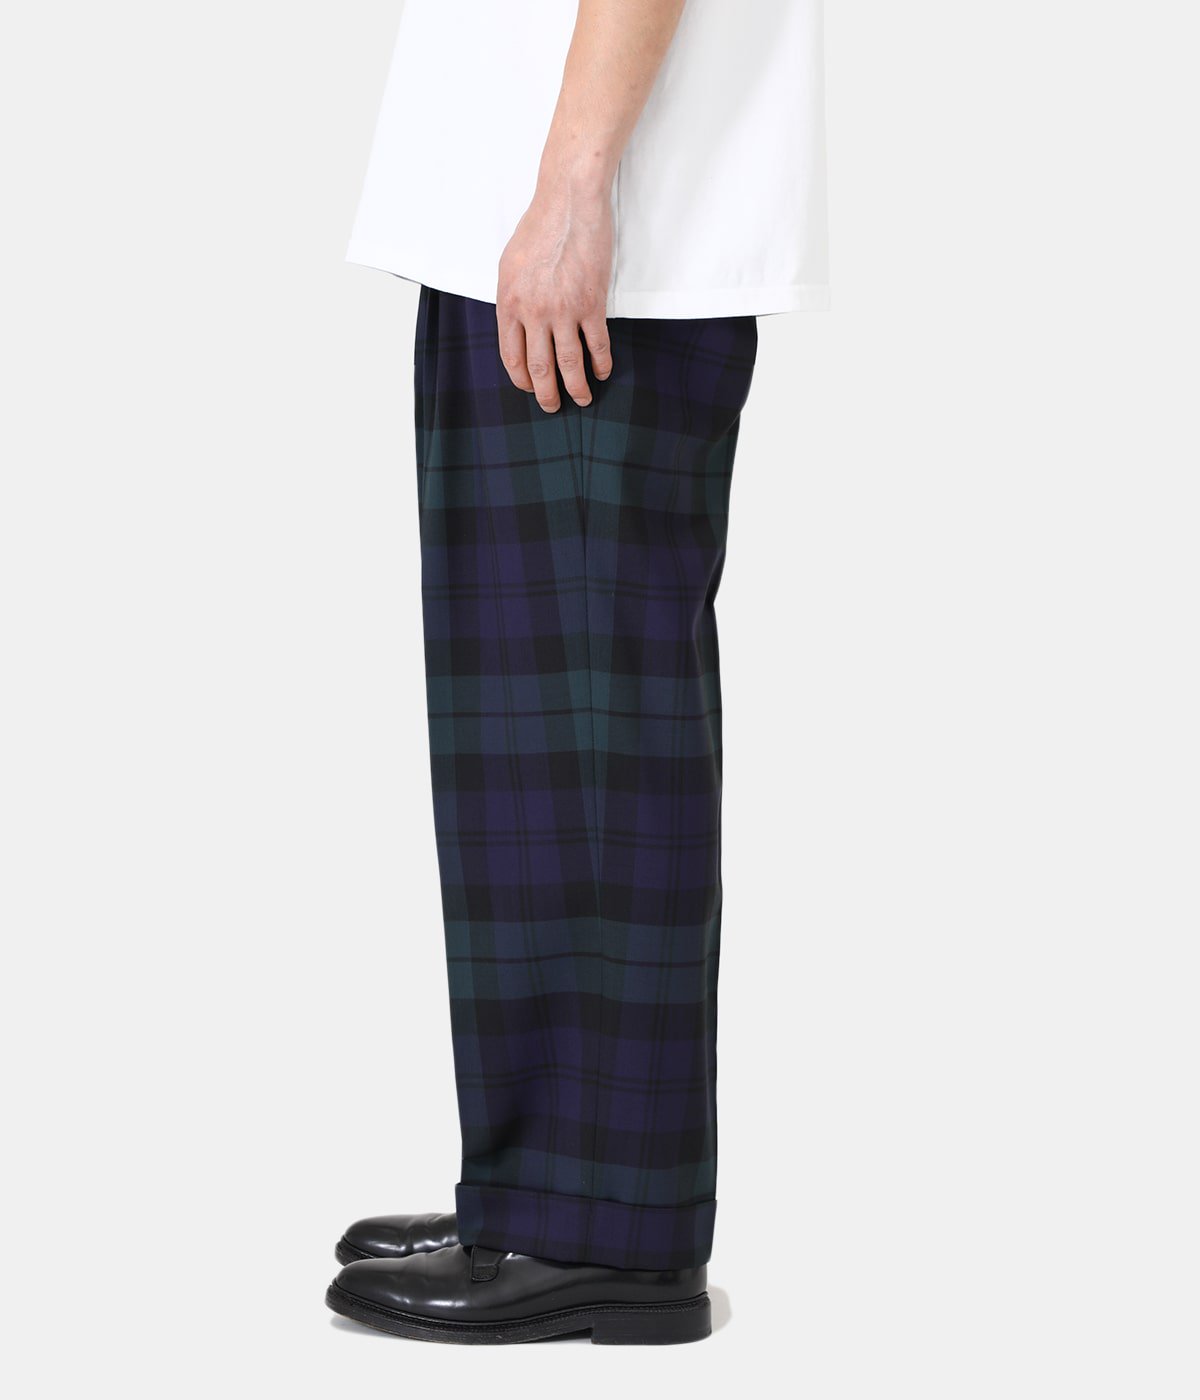 DOUBLE PLEATED CLASSIC WIDE TROUSERS